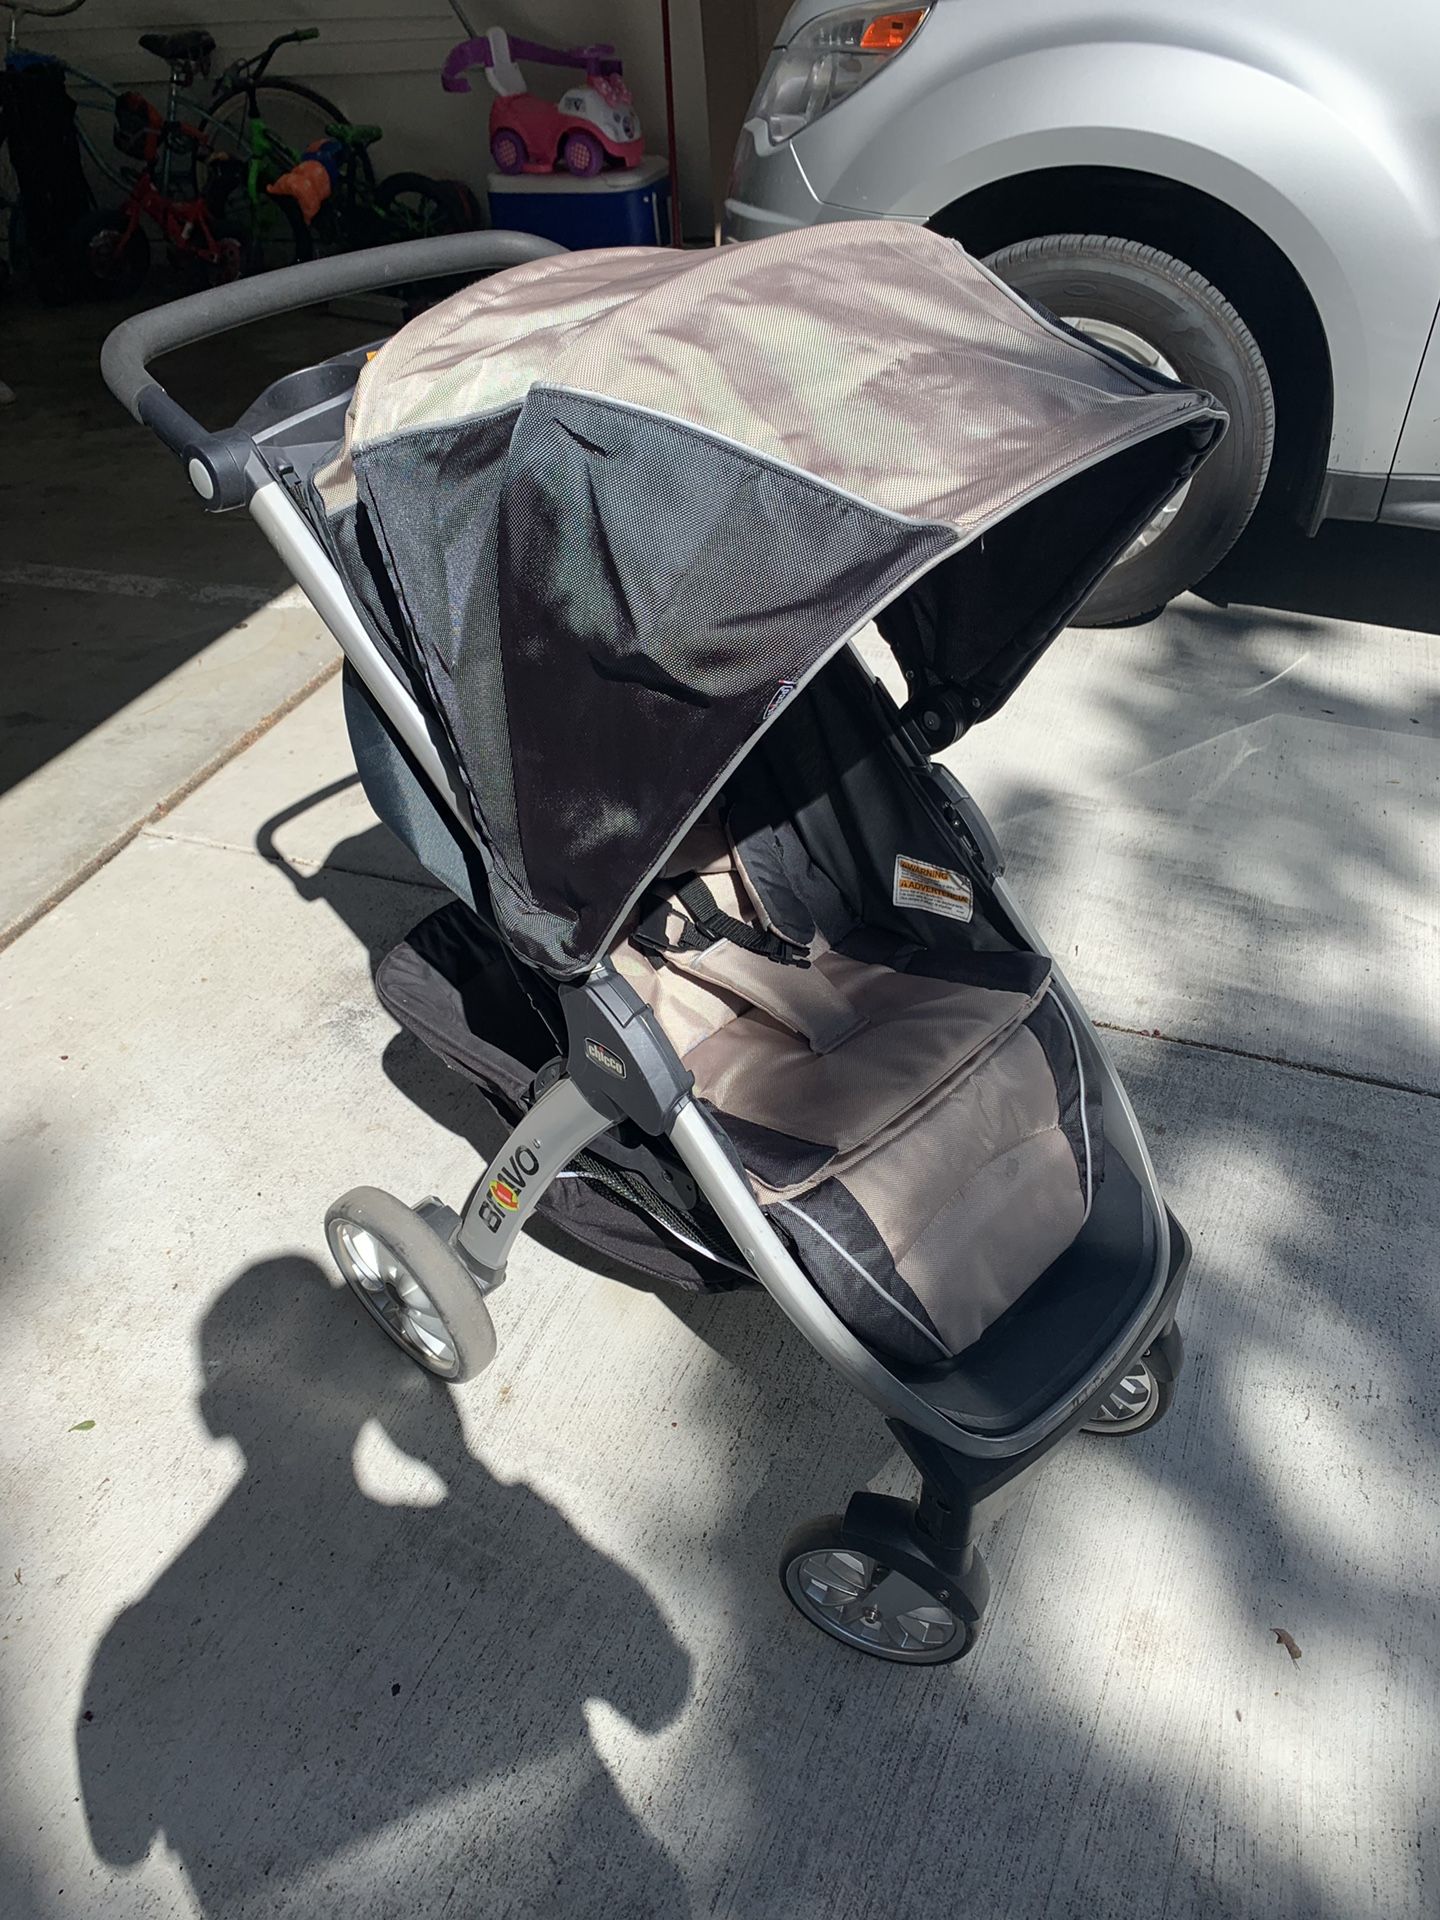 Chicco Stroller & Car Seat